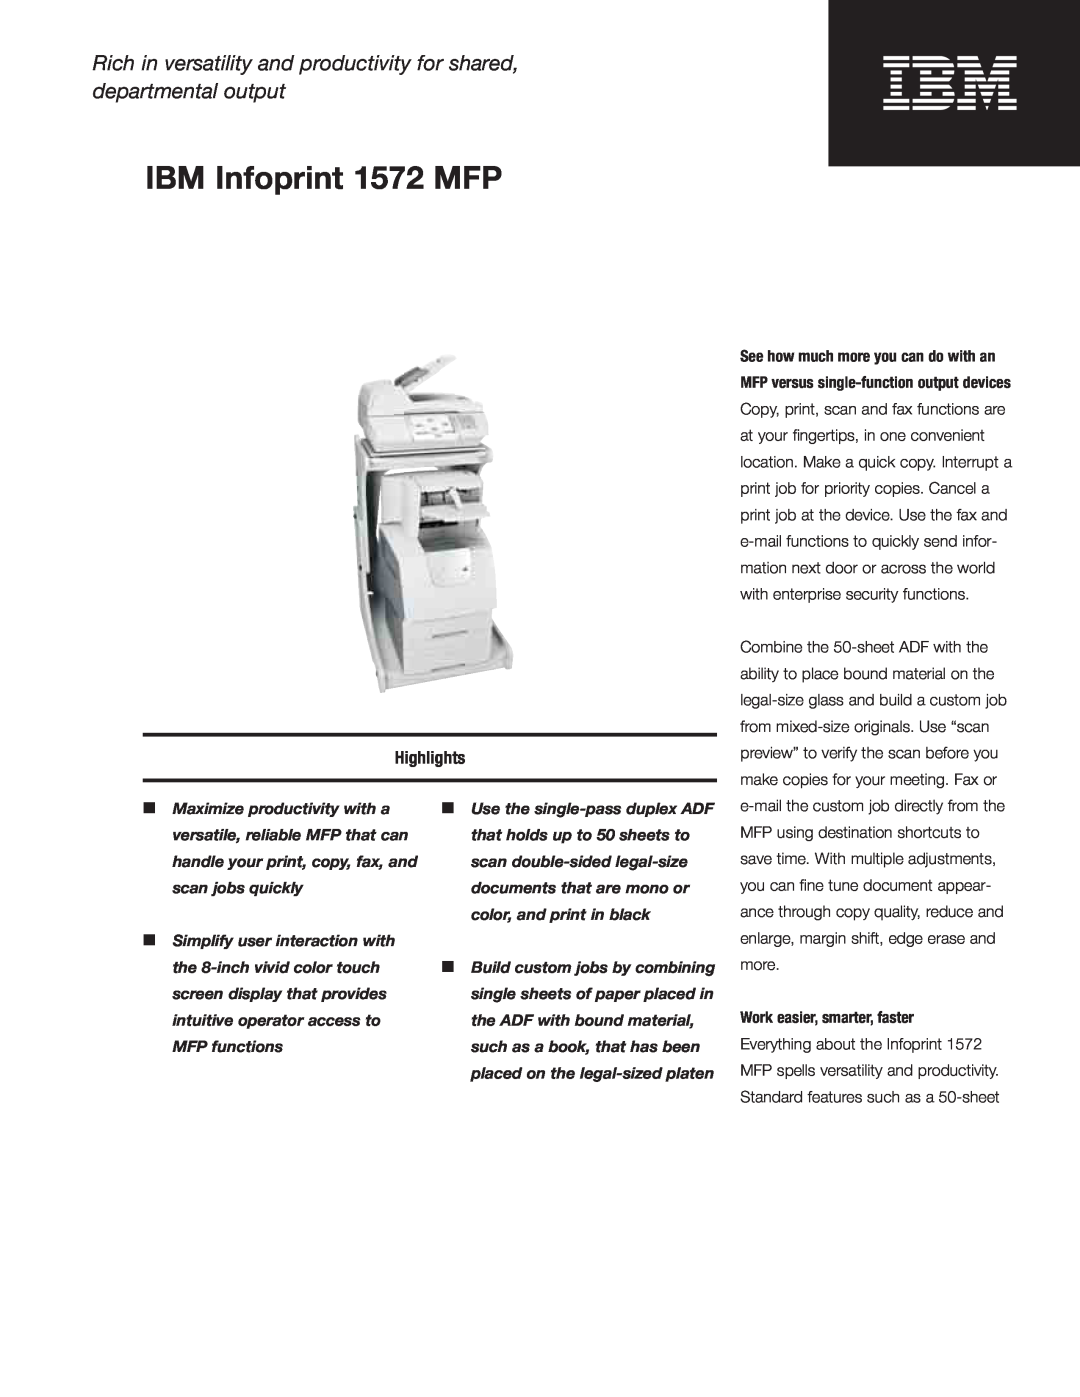 IBM 1572 MFP manual Highlights, See how much more you can do with an, MFP versus single-function output devices 